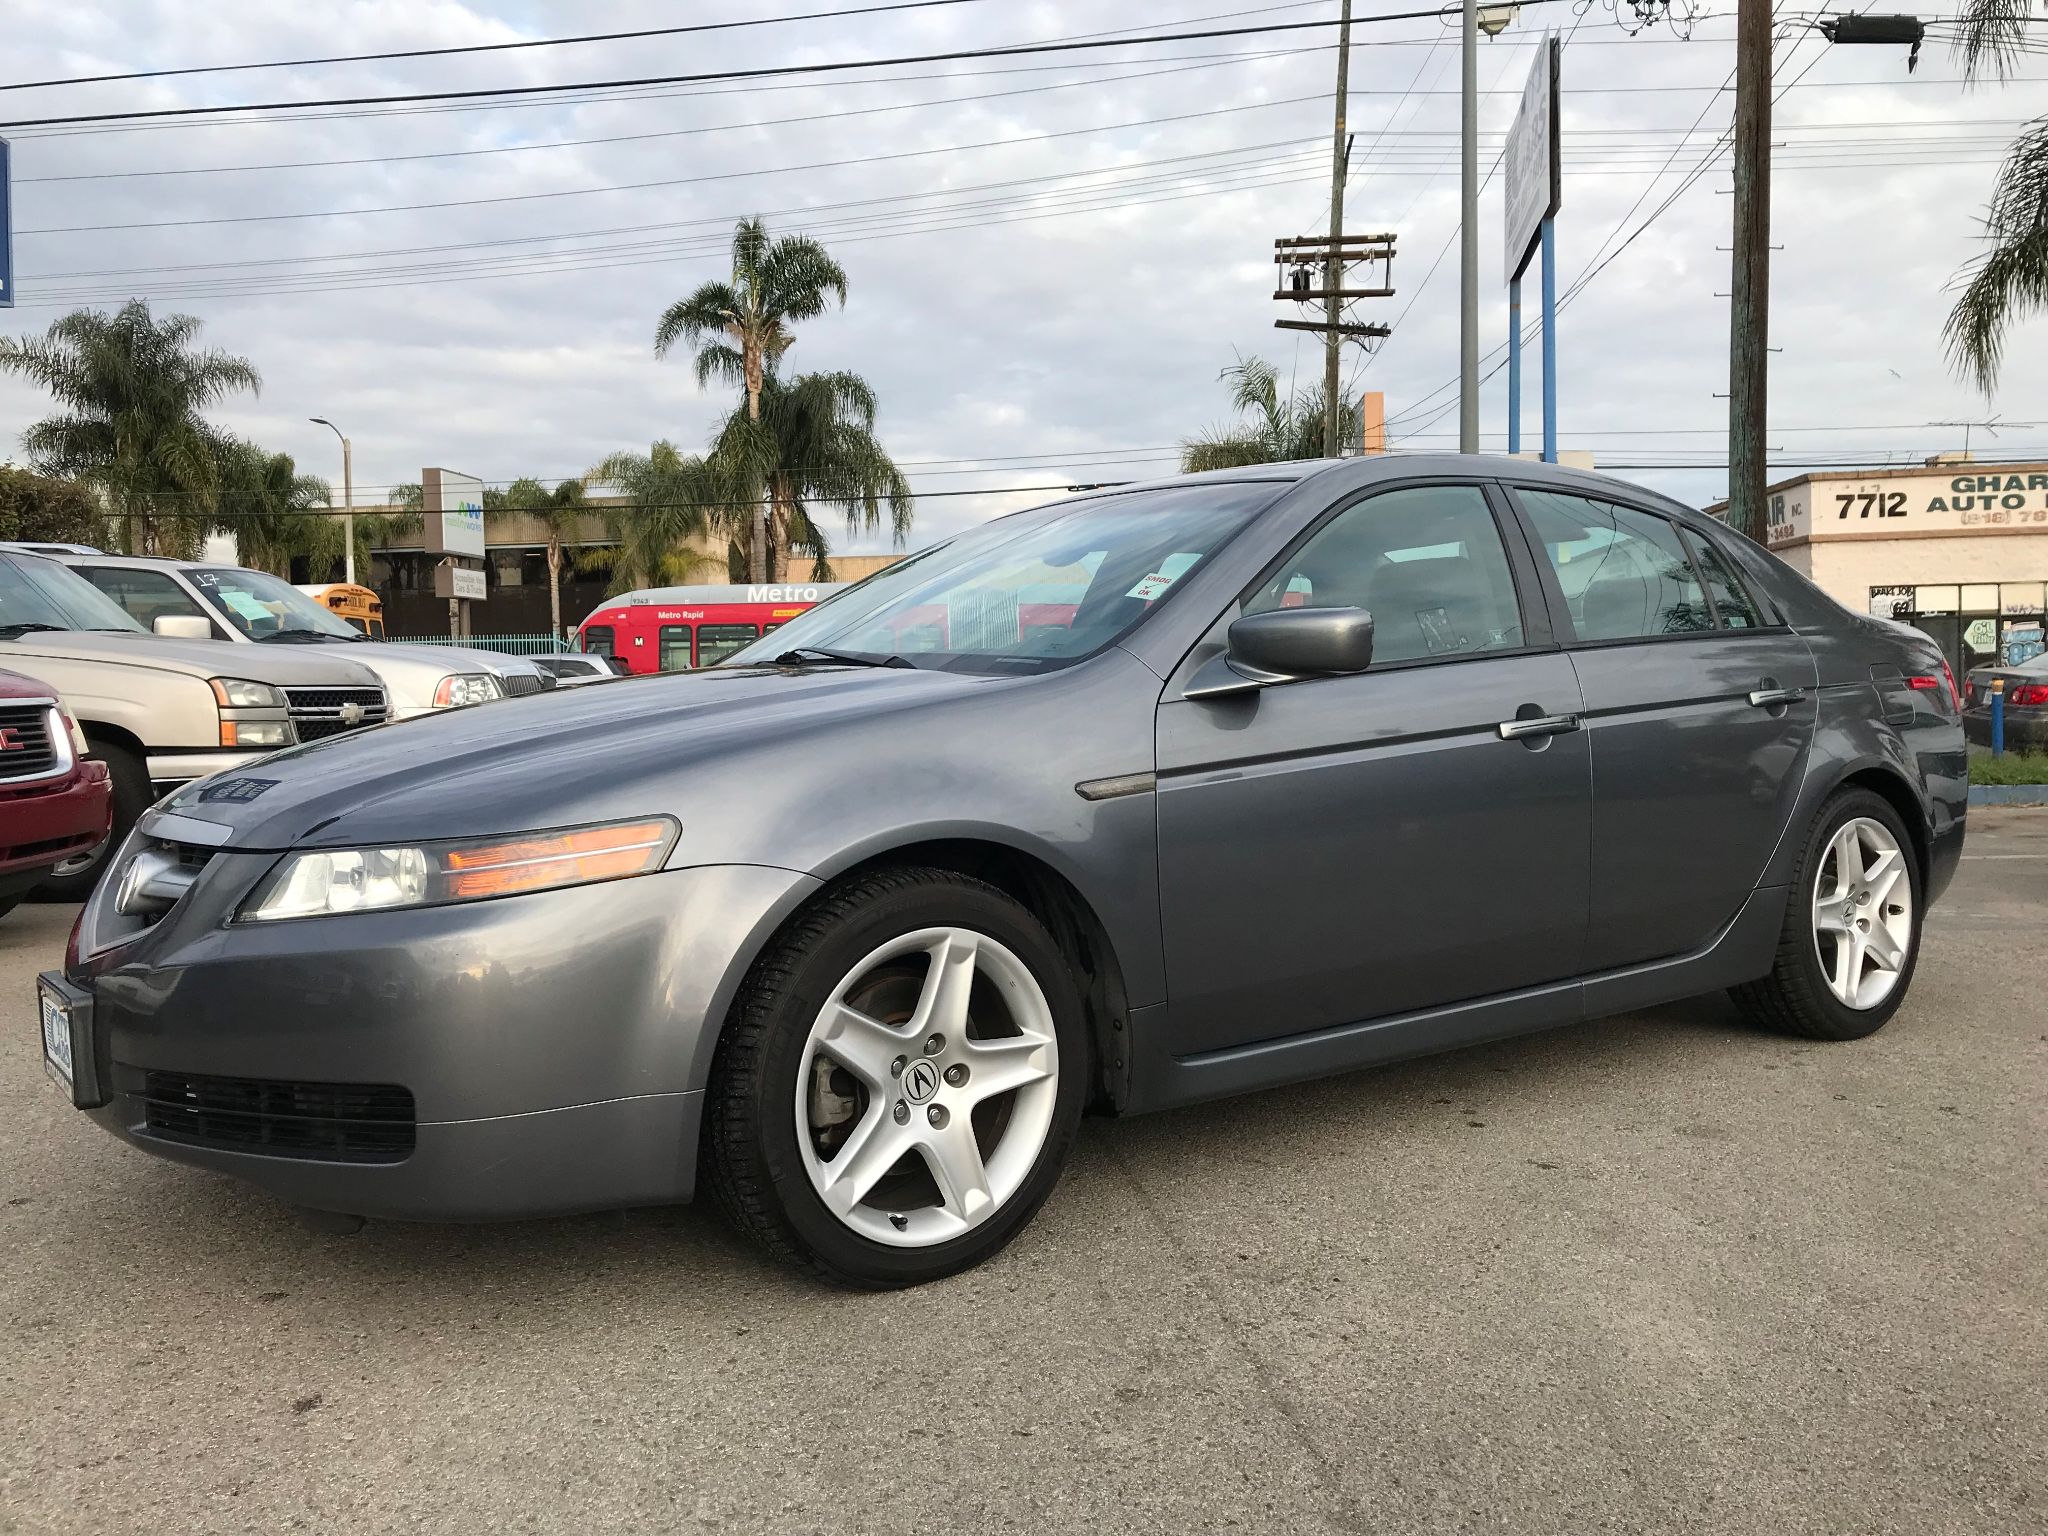 Used 2005 Acura Tl Fwd With Navigation For Sale With Photos Cargurus